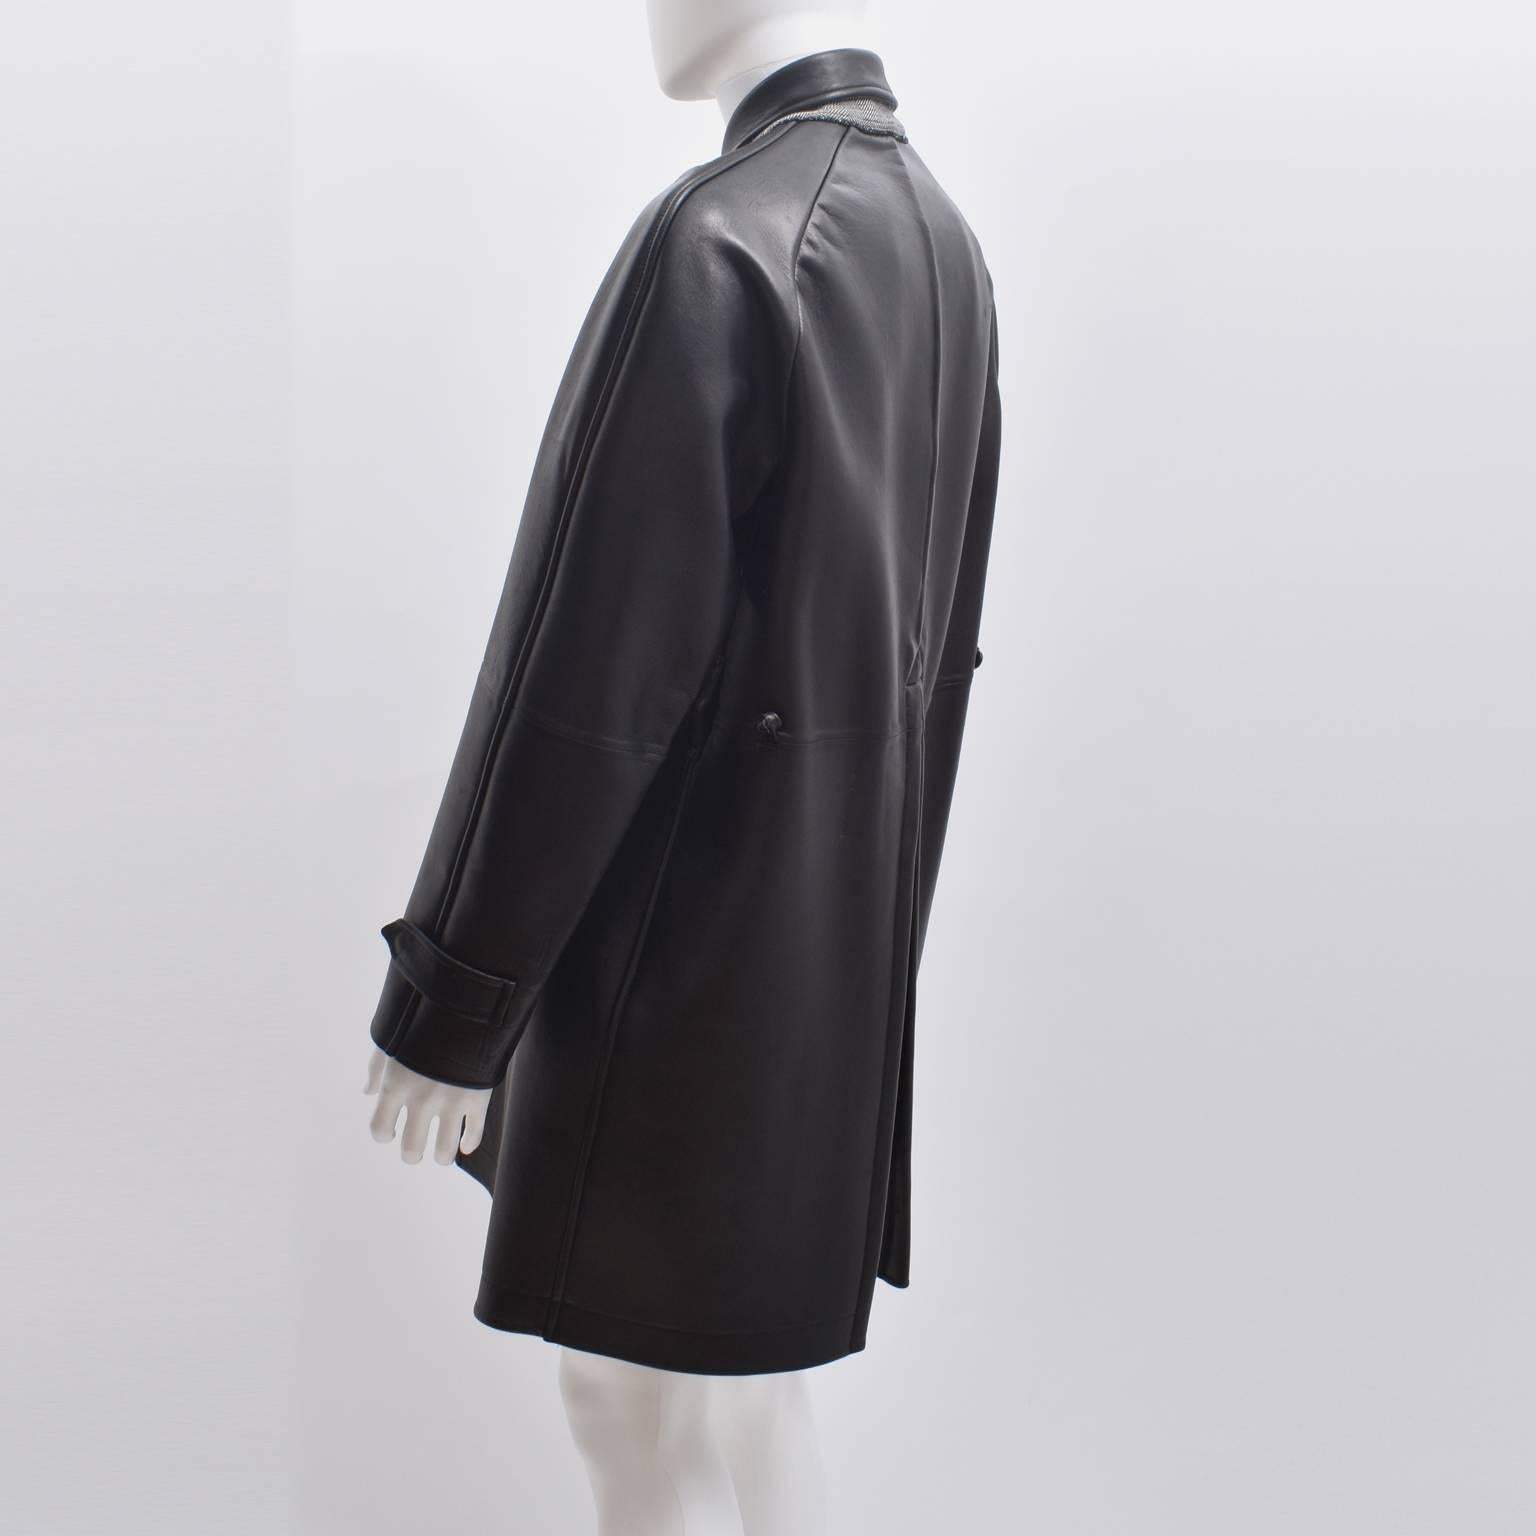 Burberry Prorsum Black Leather Long Coat A/W13 (SAMPLE) In Good Condition For Sale In London, GB